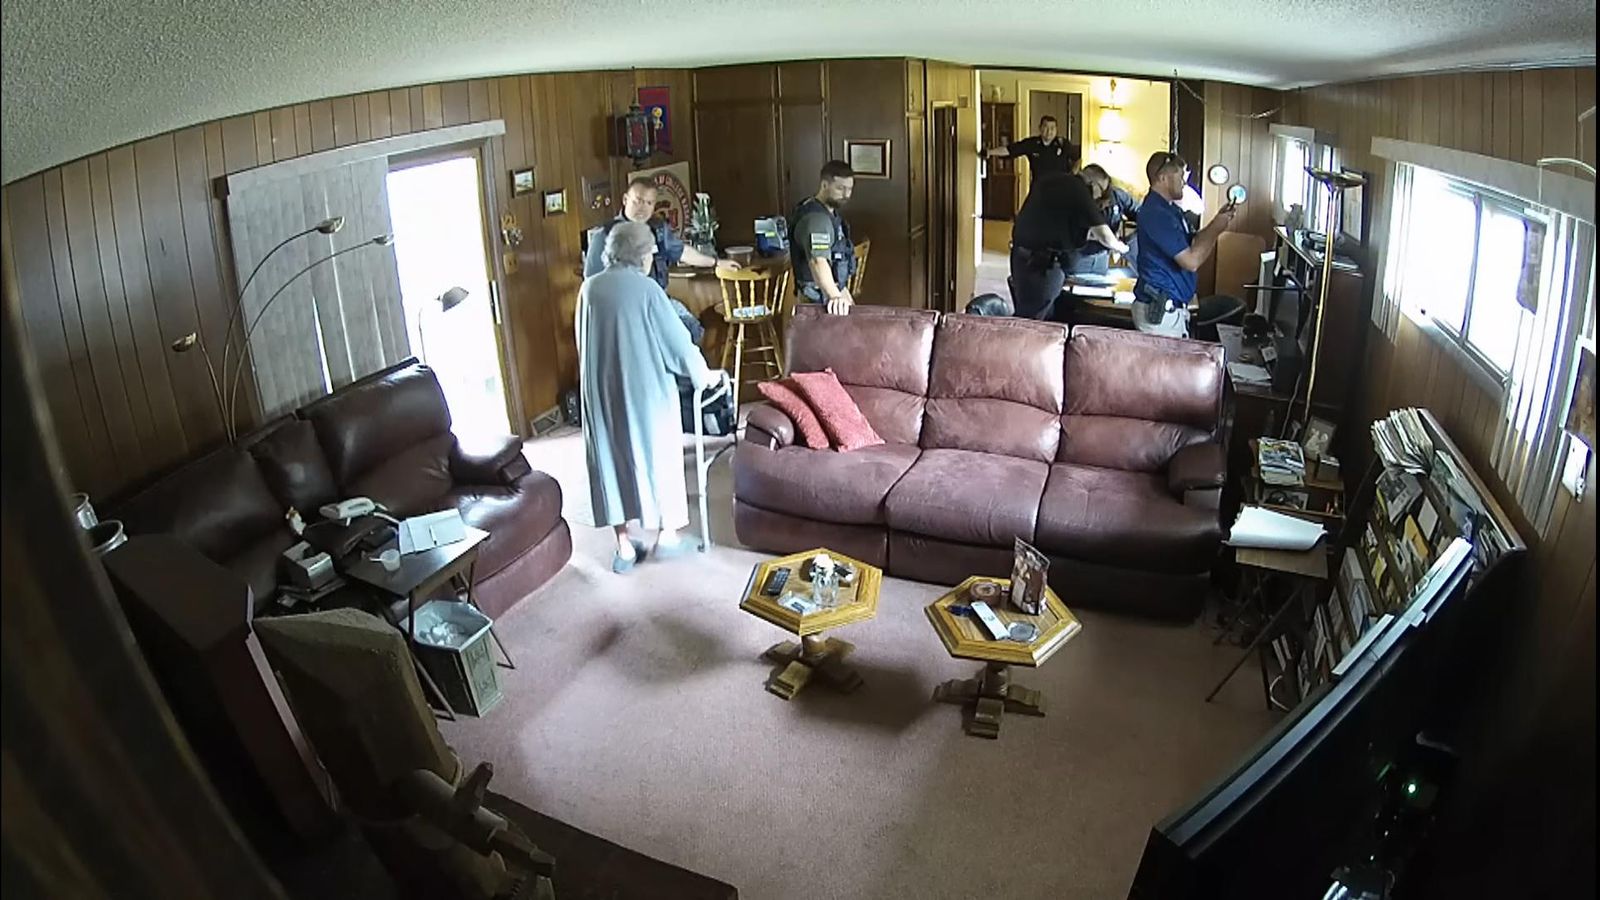 Kansas: Video shows police raid at home of 98-year-old Marion County Record newspaper publisher who died the next day